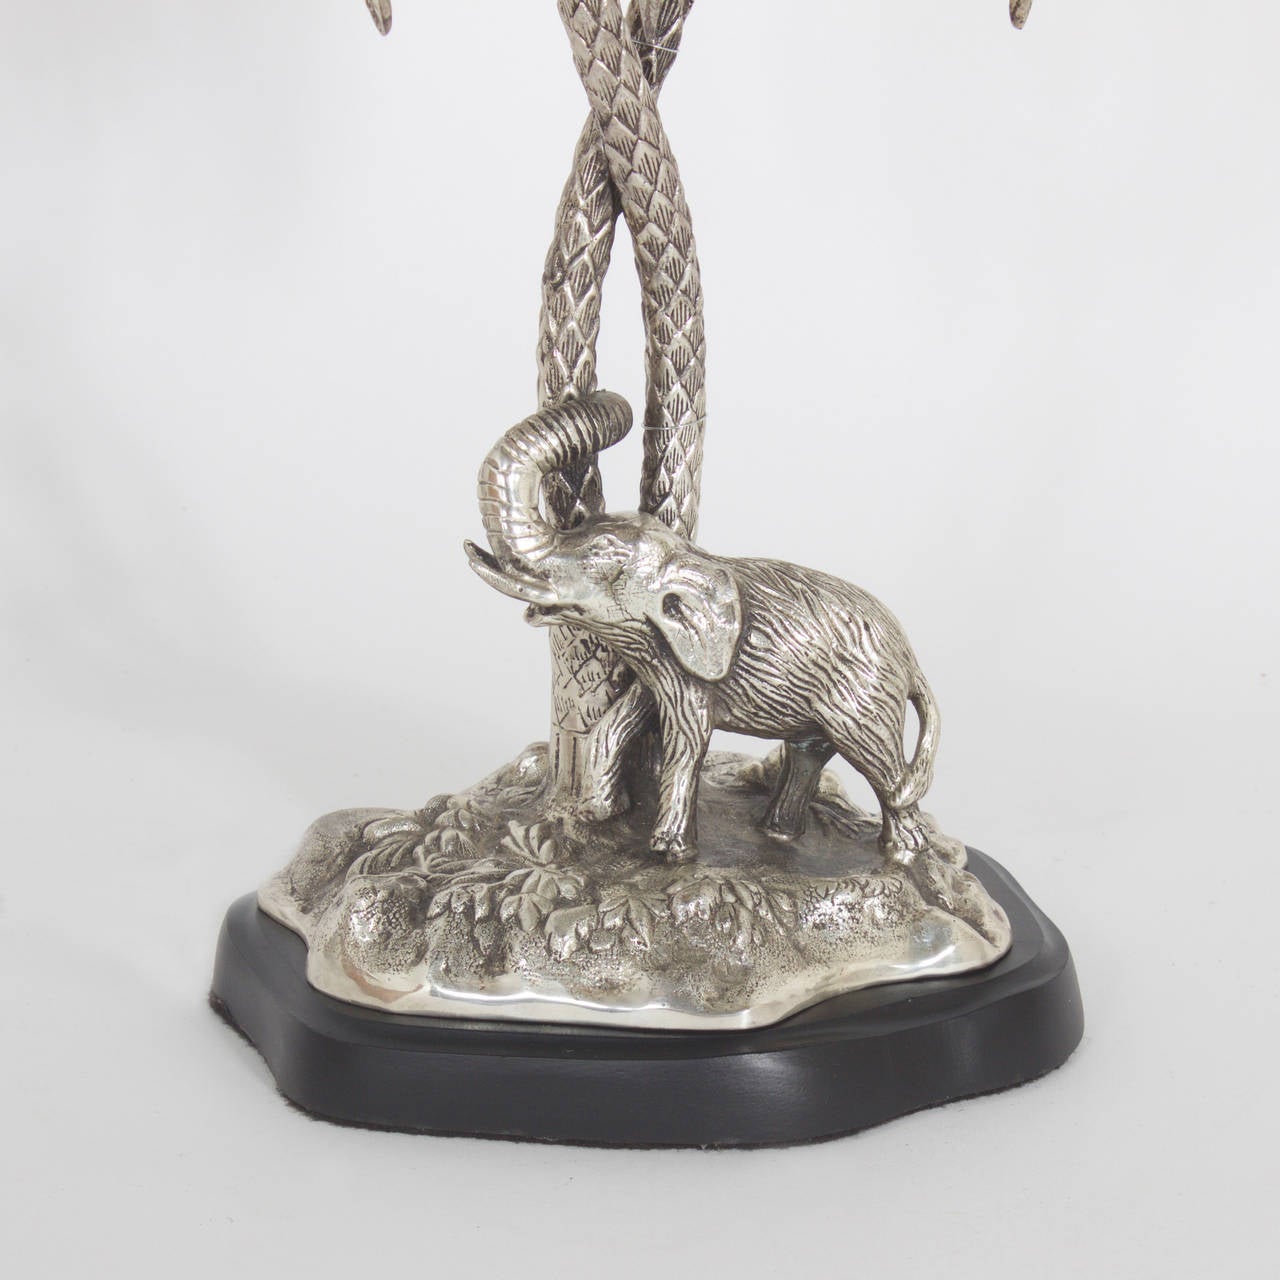 English Pair of Silvered Metal Palm Tree Lamps with Camel and Elephant